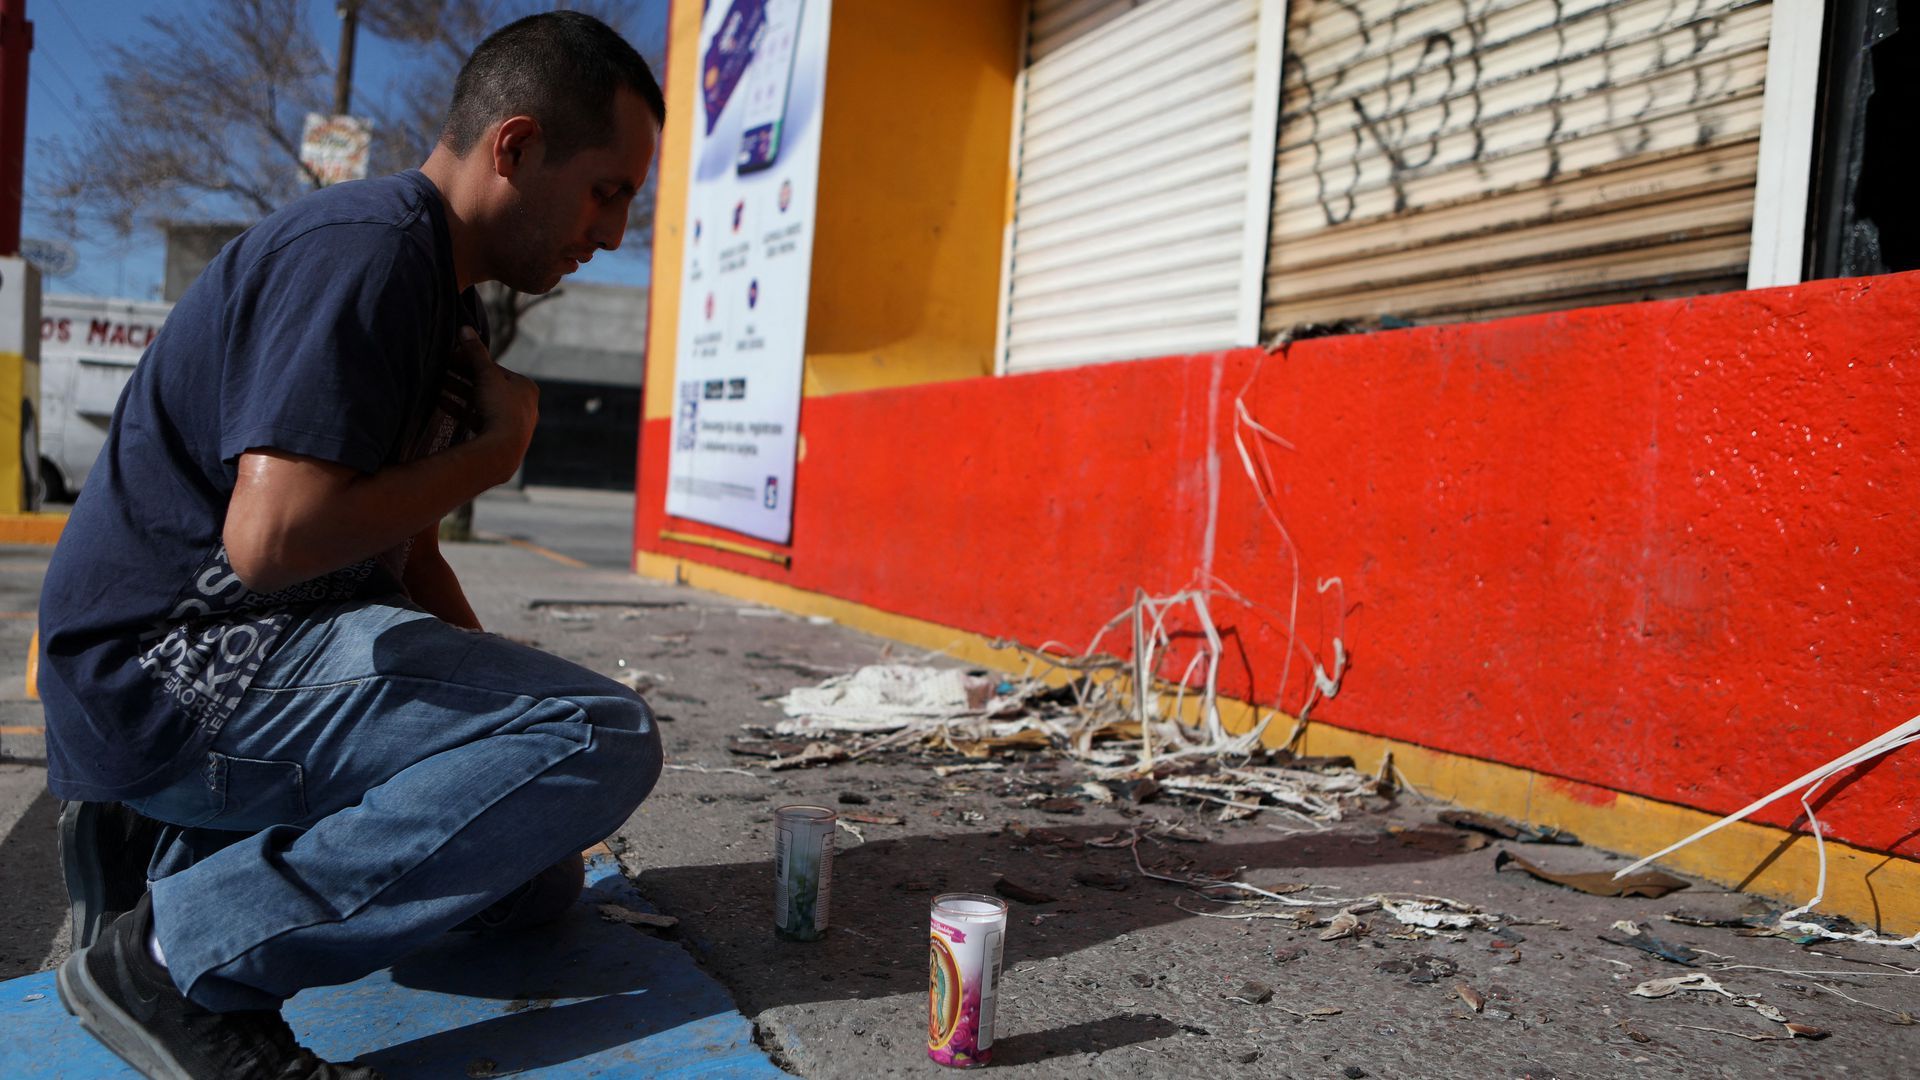 A man kneels next to a small memorial for murder victims in Ciudad Juarez, Mexico